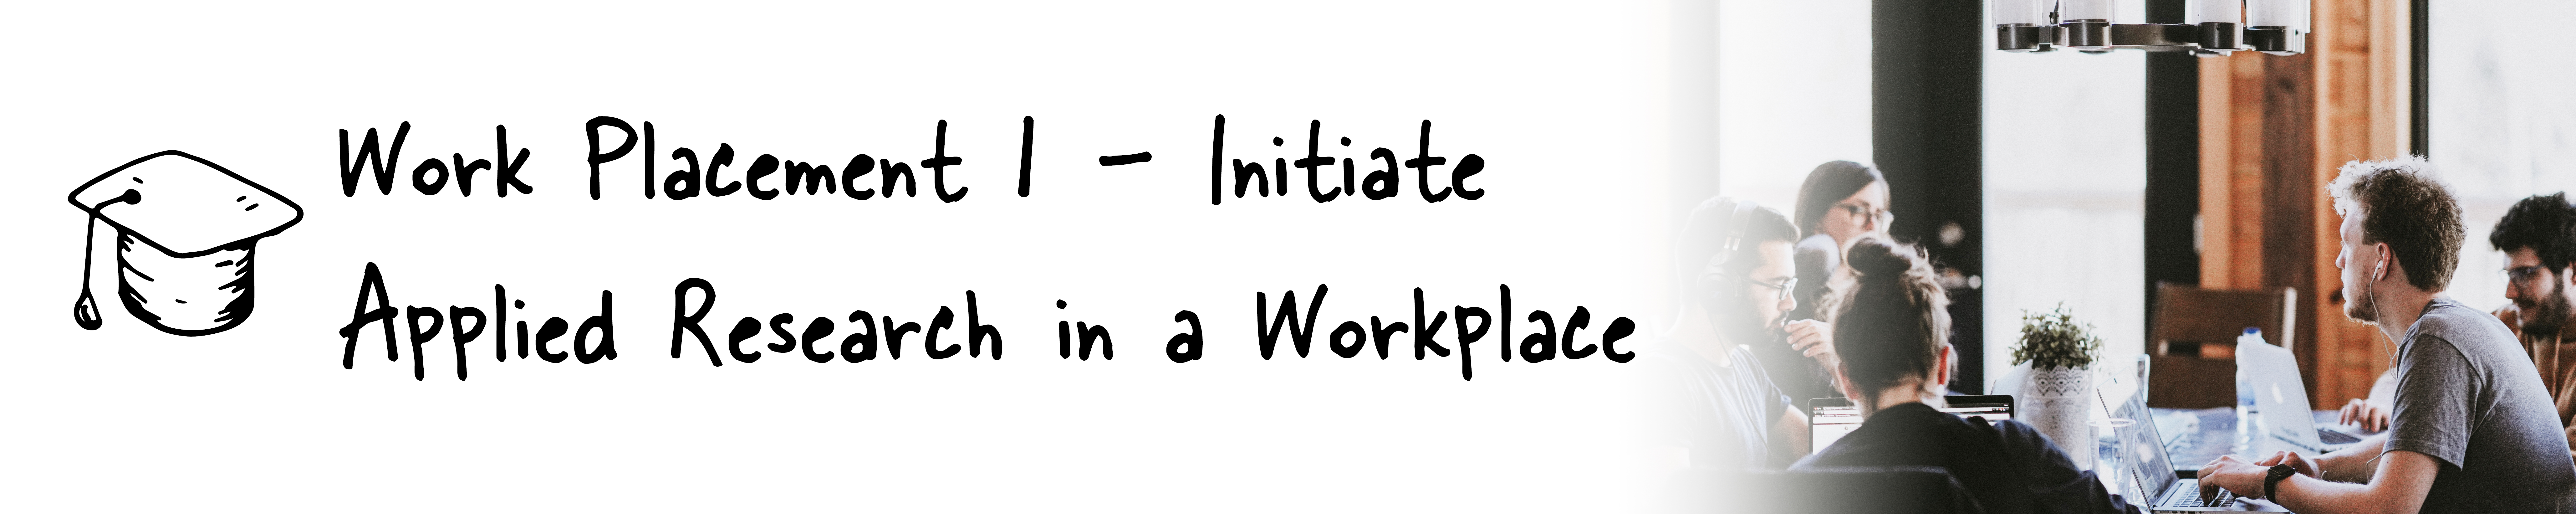 Work Placement 1 - Initiate Applied Research in a Workplace 